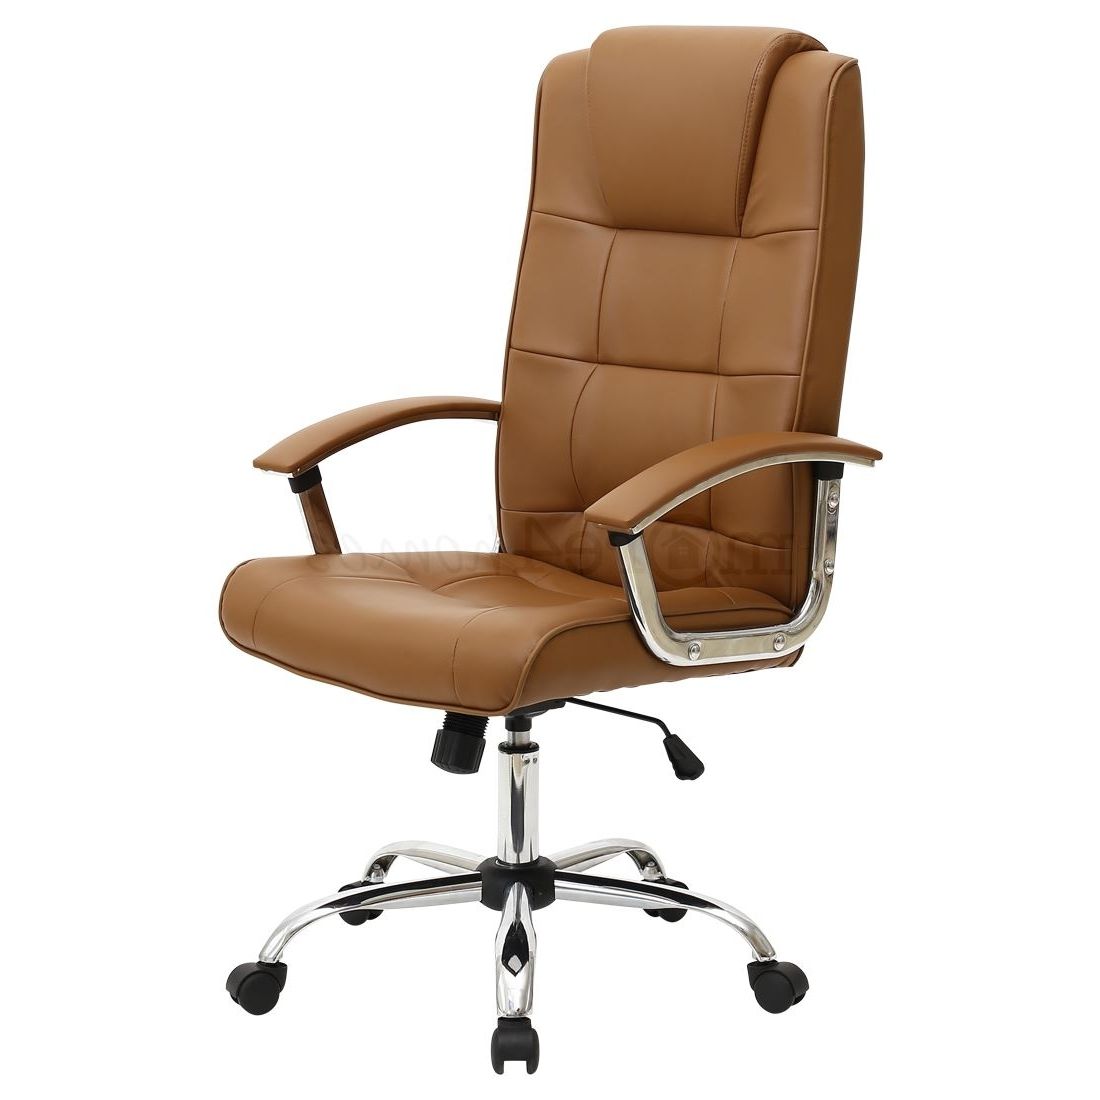 Preferred Chair : High Back Executive Leather Office Chair Verona Brown Intended For Verona Cream Executive Leather Office Chairs (View 9 of 20)